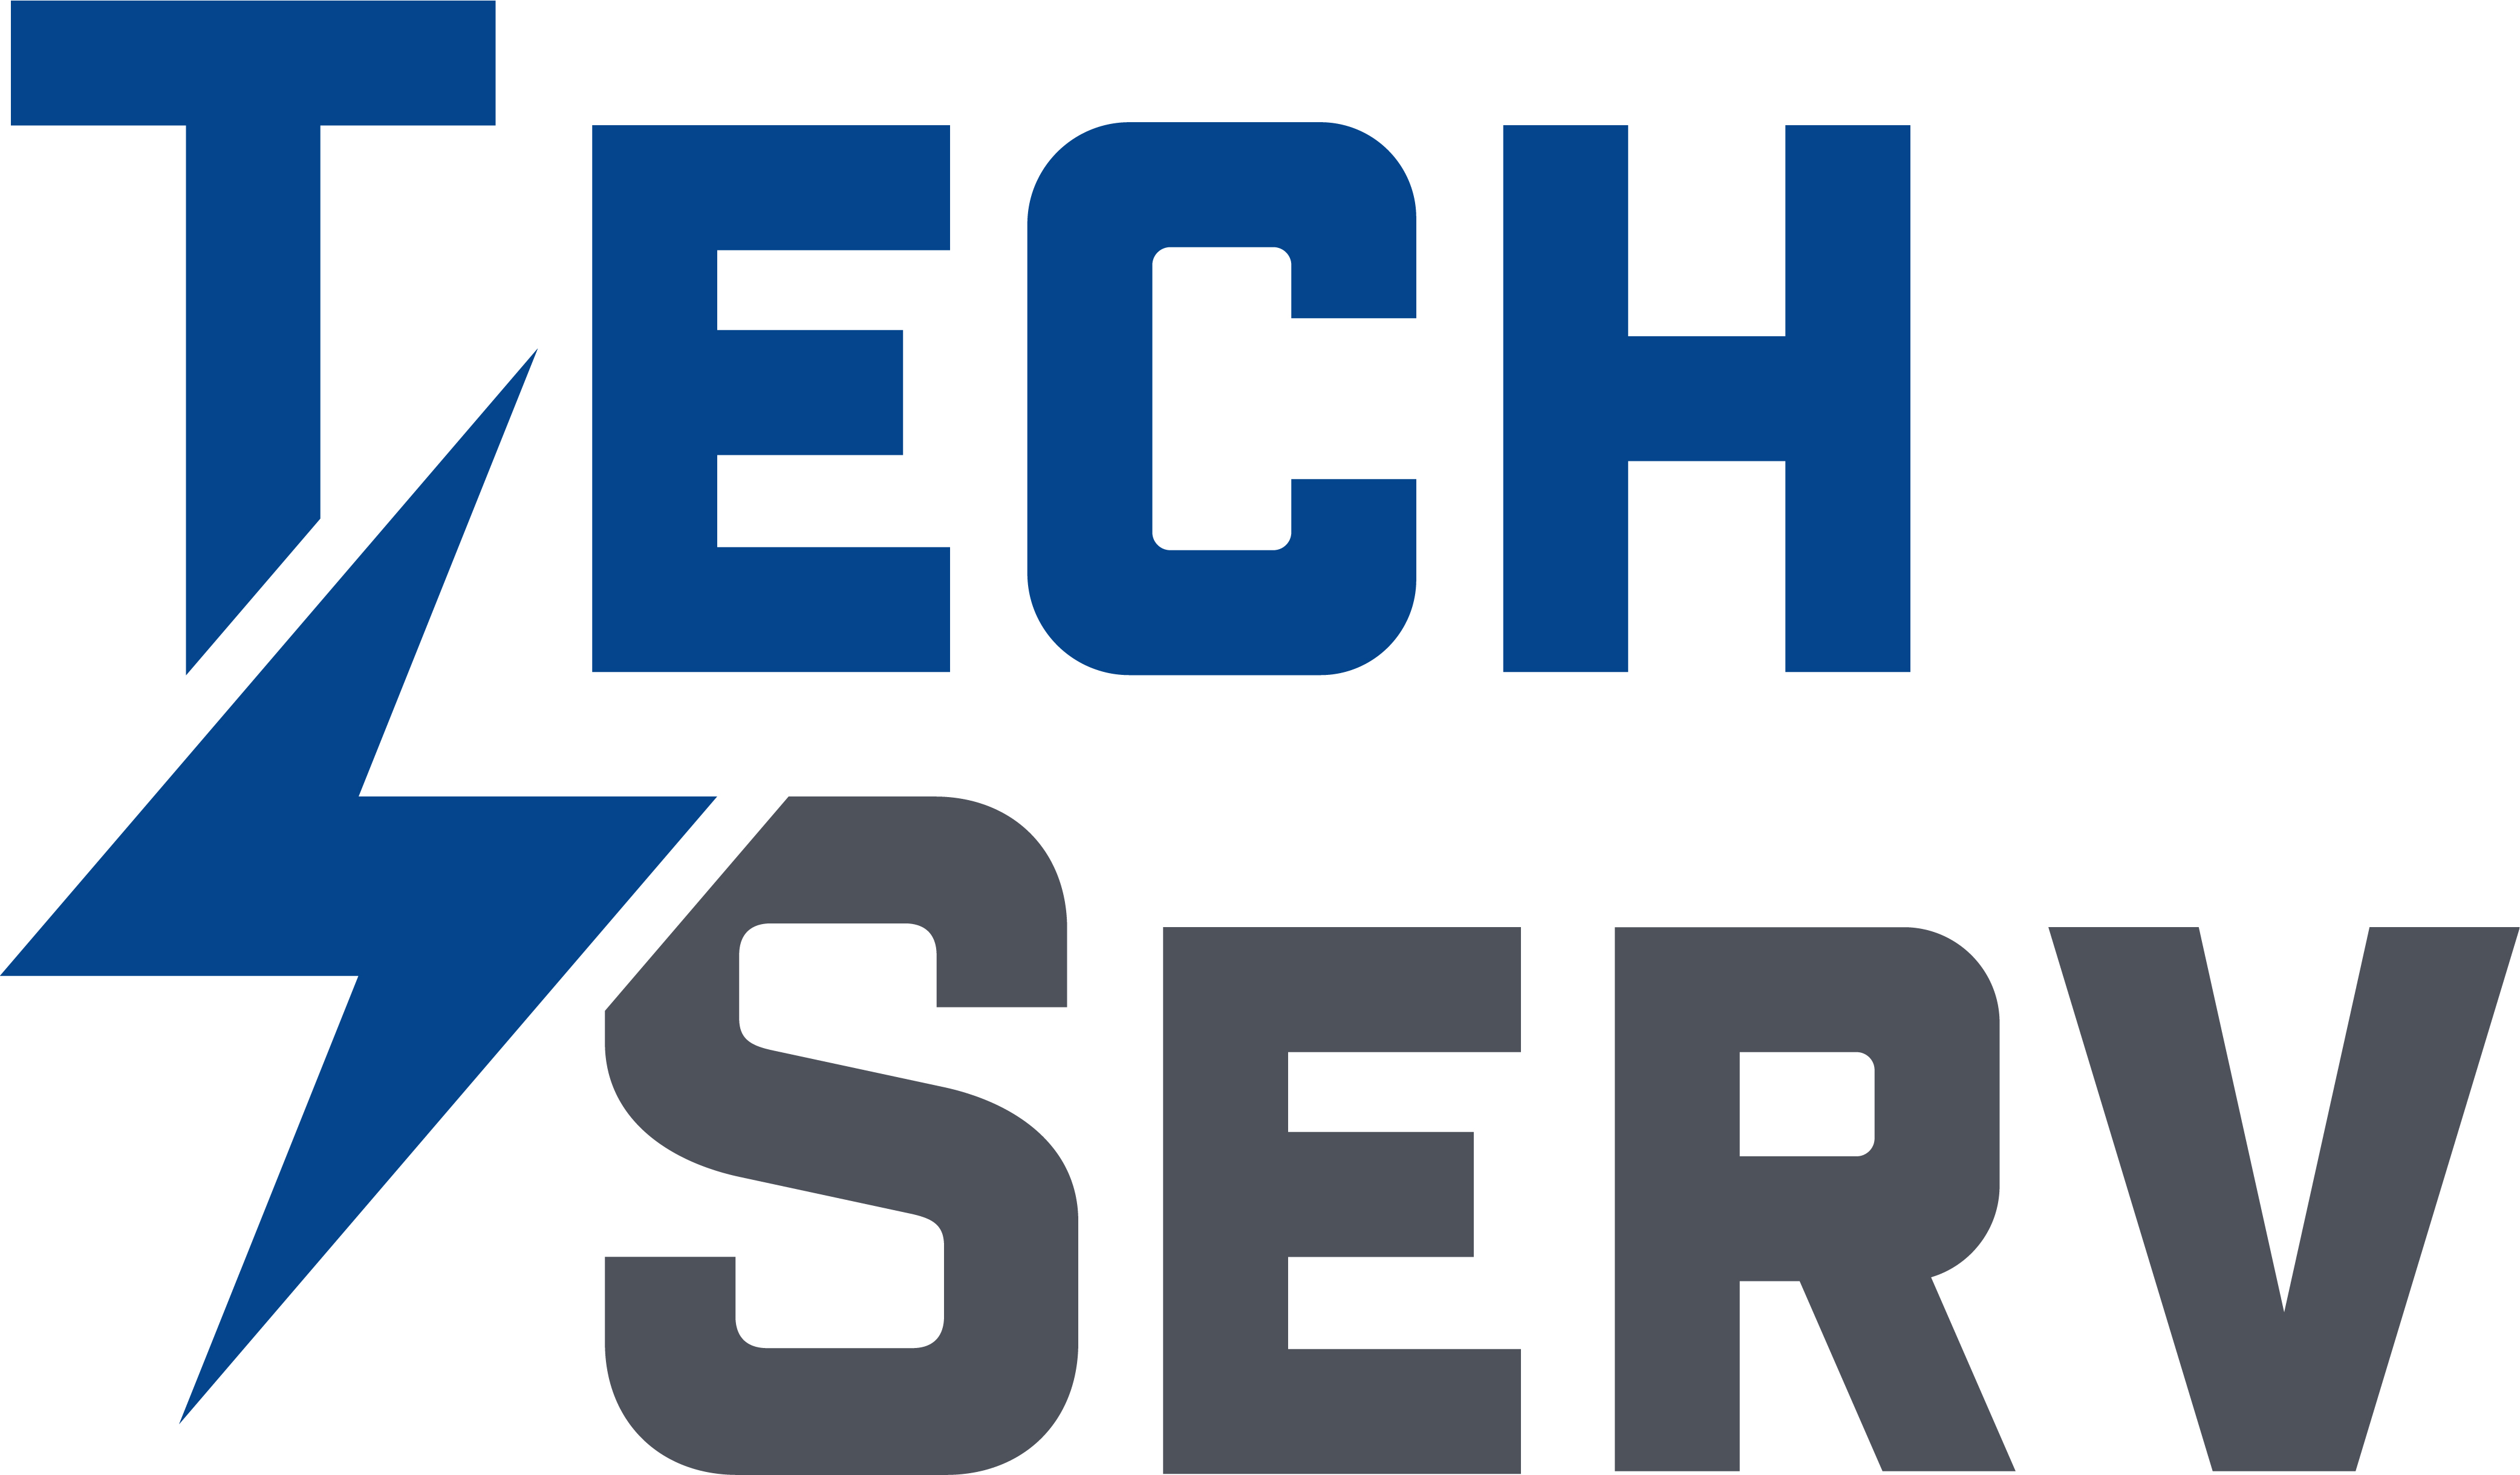 TechServ Engineering & Consulting